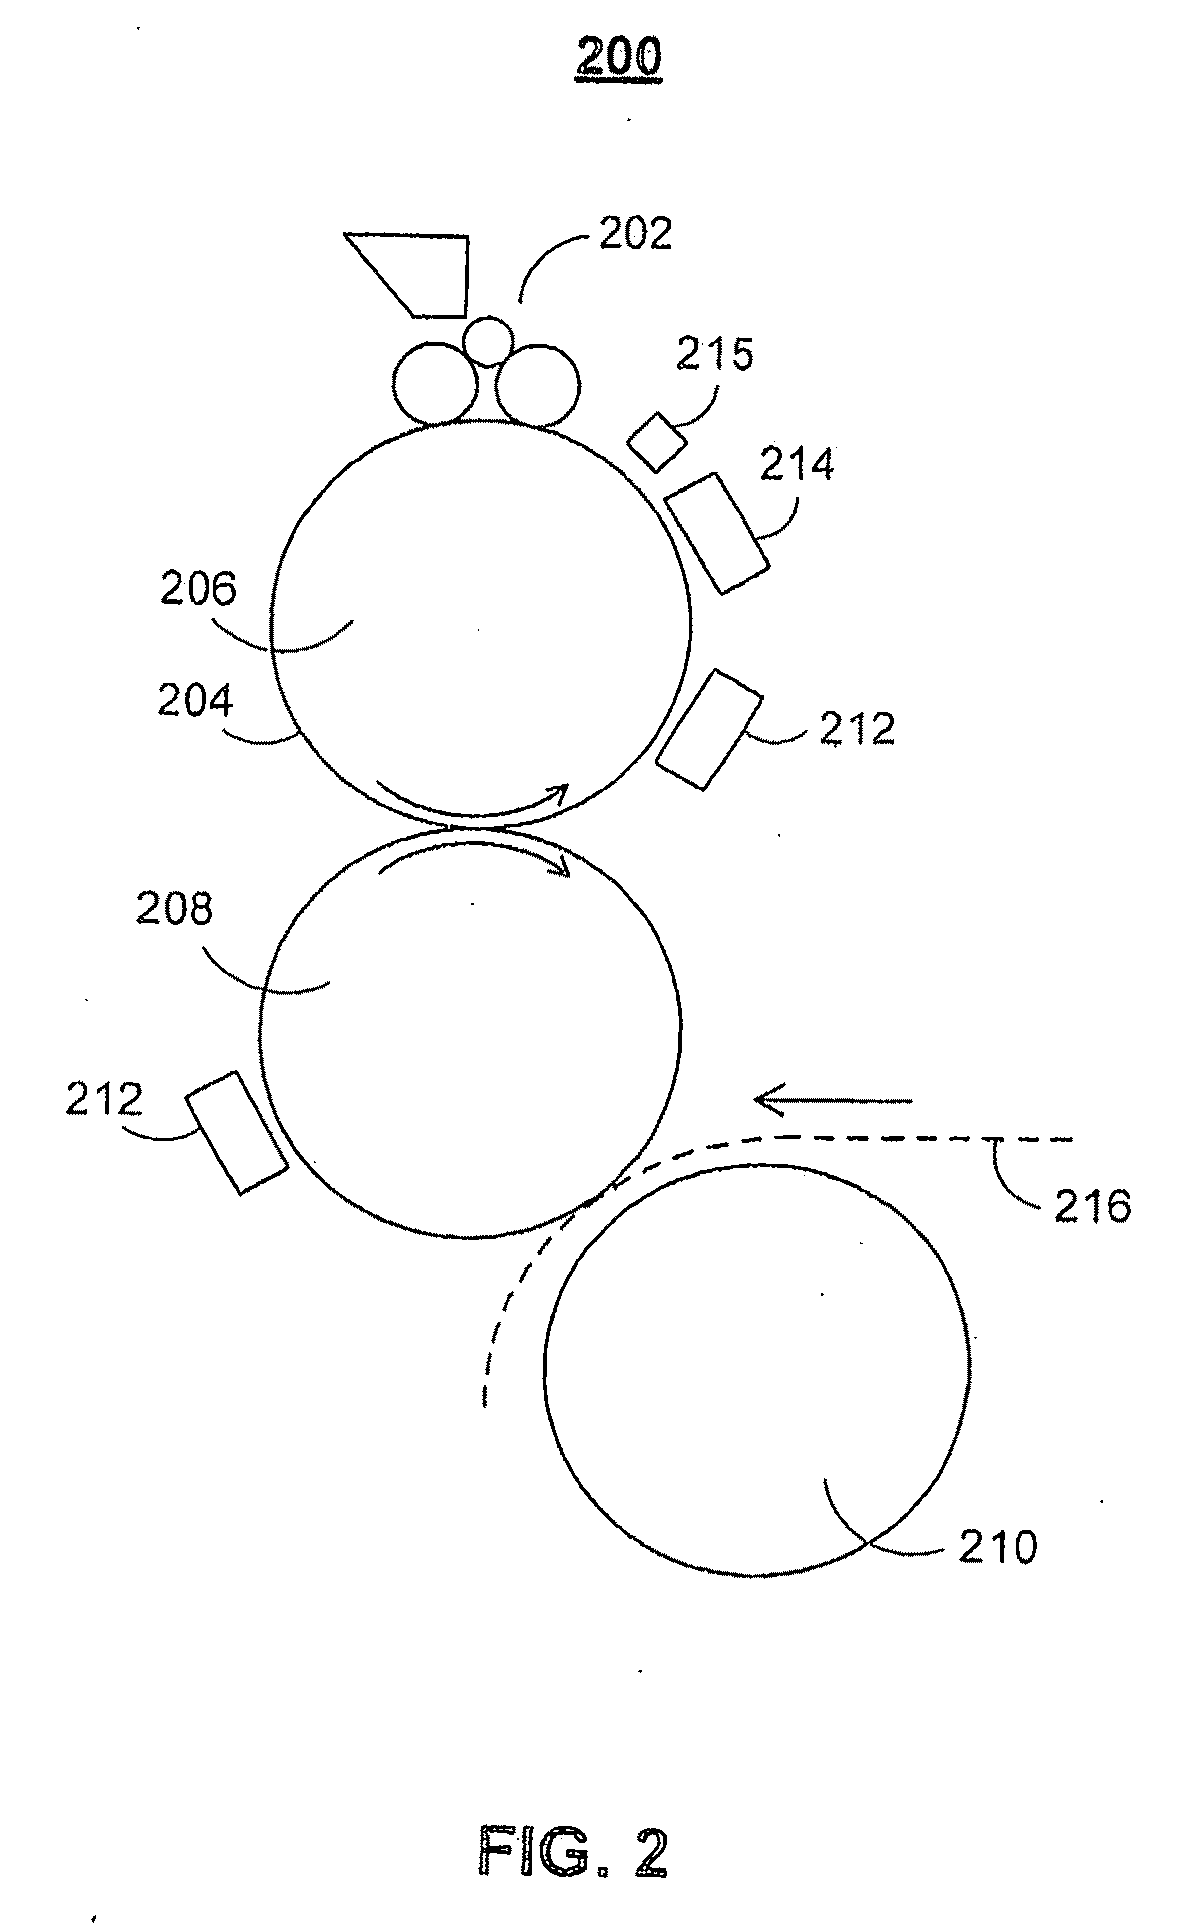 Apparatus and methods for controlling application of a substance to a substrate